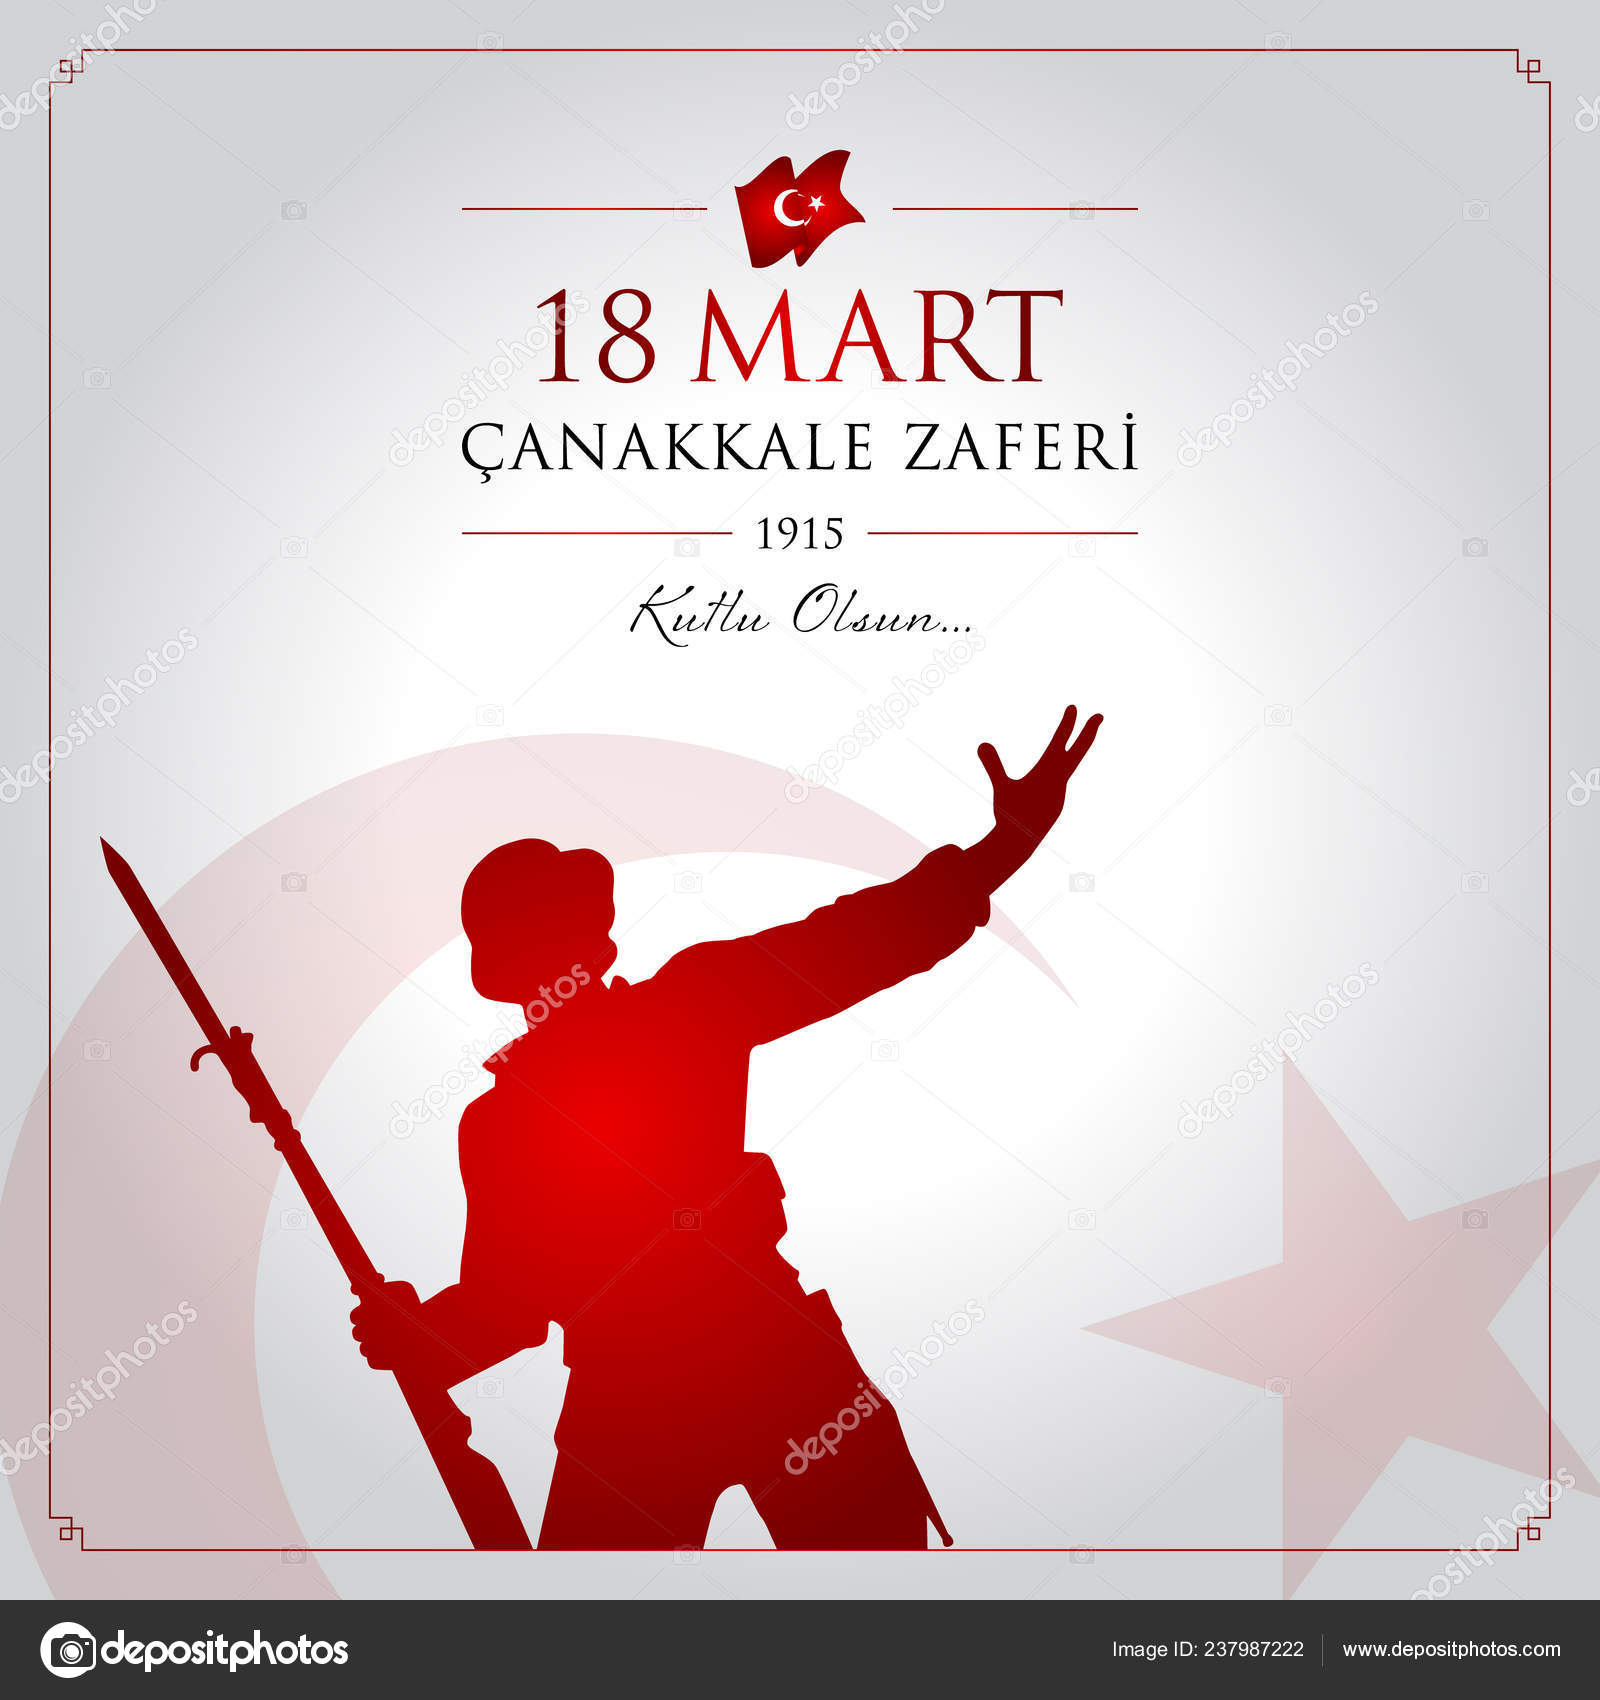 Mart Canakkale Zaferi Vector Illustration March Canakkale Victory Day Turkey Vector Image By C Cylnone Vector Stock